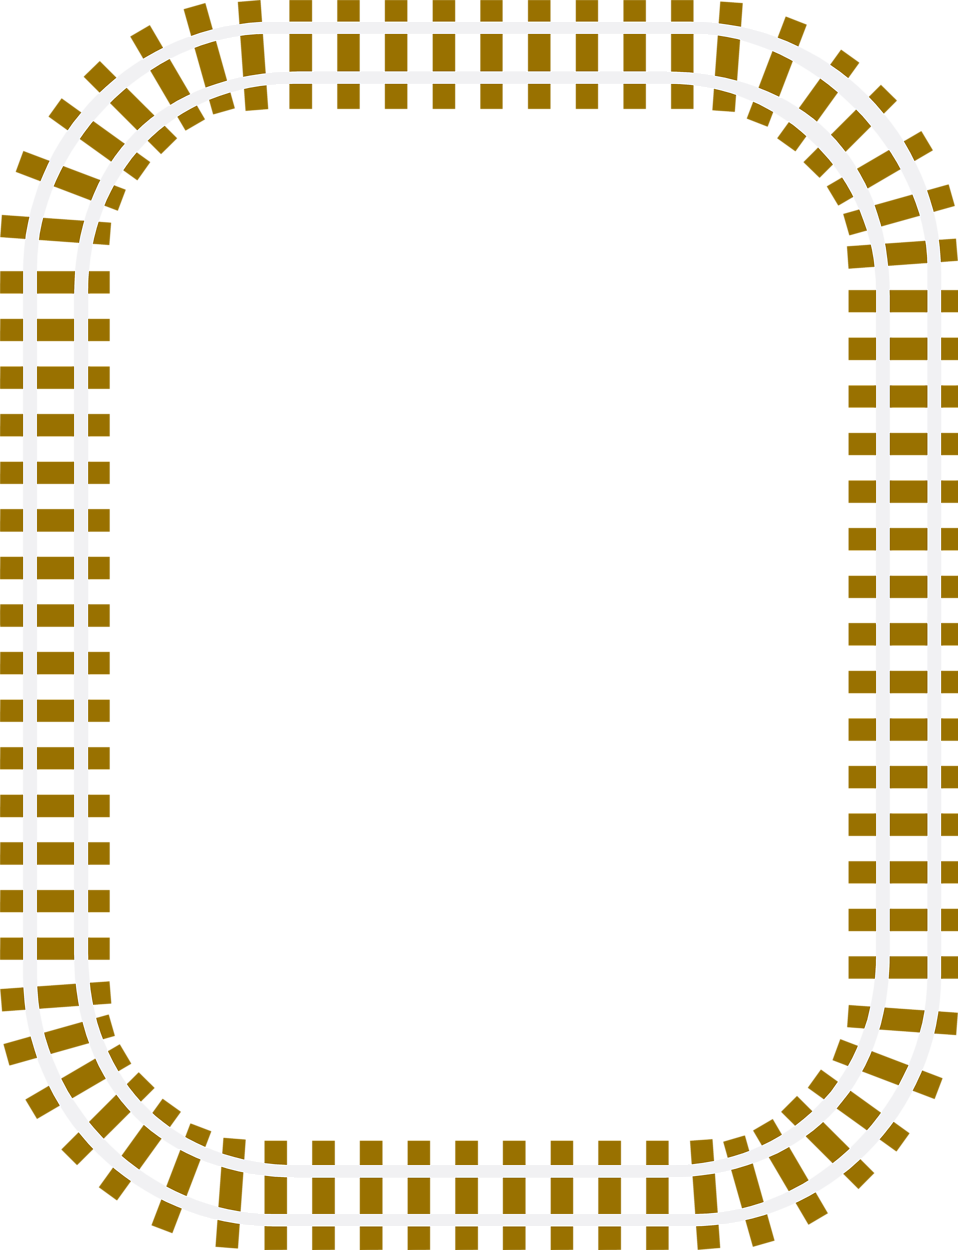 Garland clipart yellow. Illustration of a blank